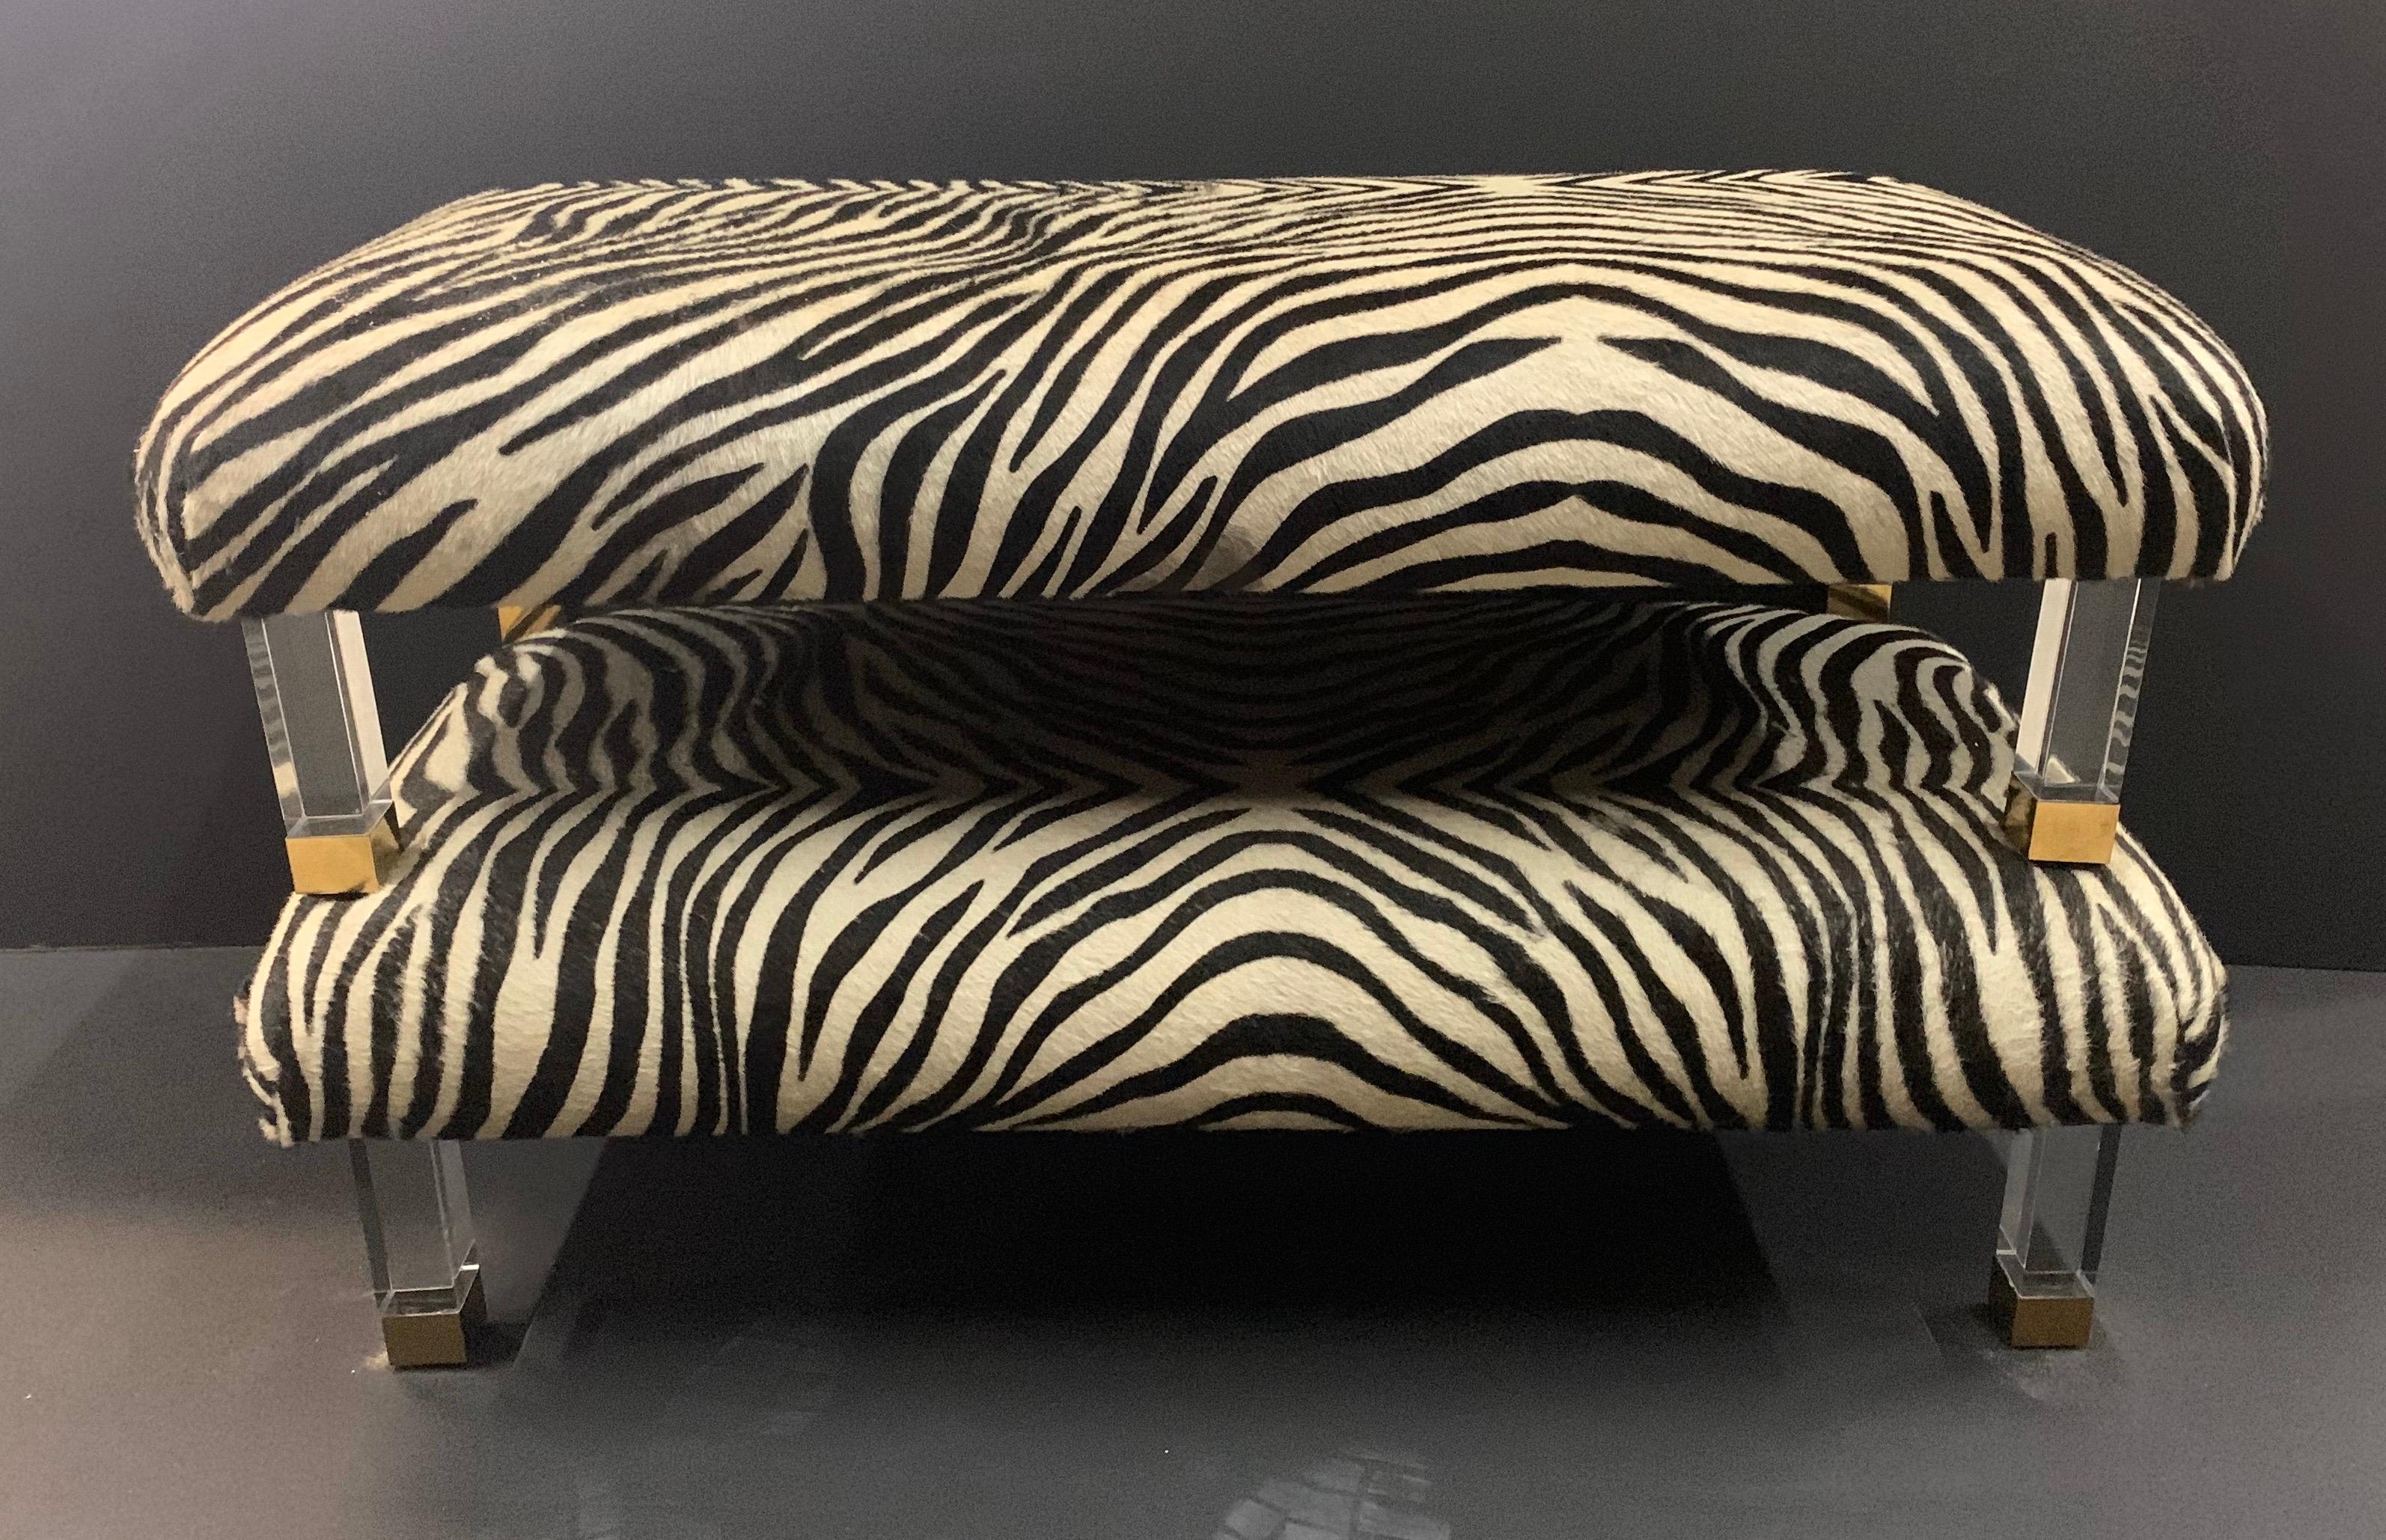 A wonderful pair of modern real zebra skin with Lucite brass legs ottomans foot stools benches, purchased from Lorin Marsh, NYC
Wear from Use, pictured.